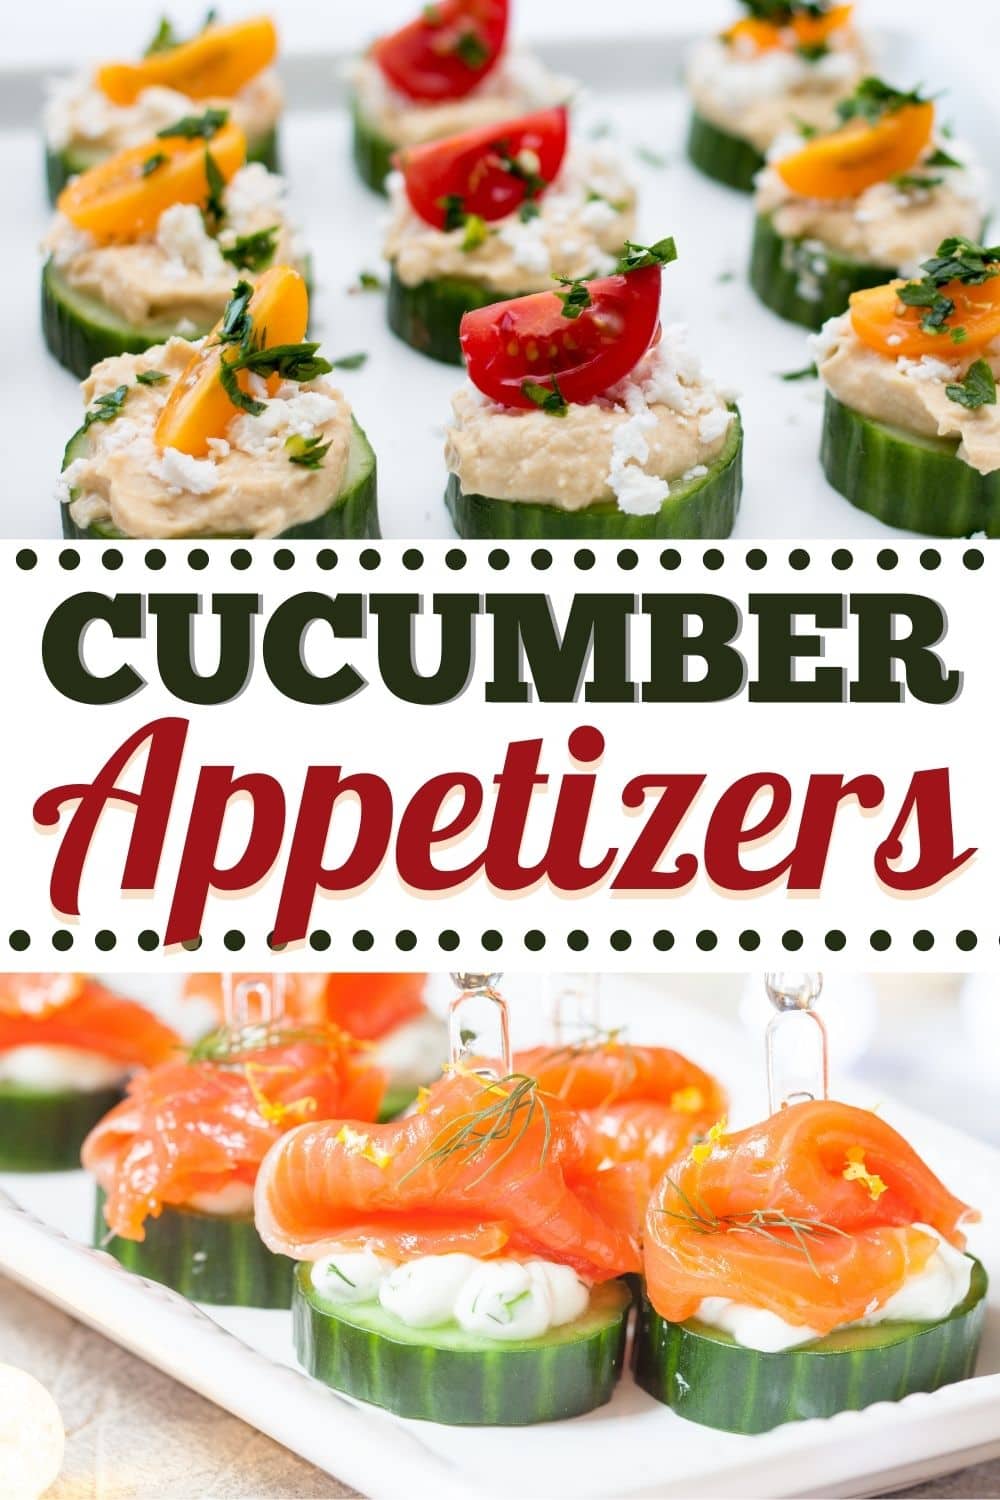 20 Easy Cucumber Appetizers - Insanely Good